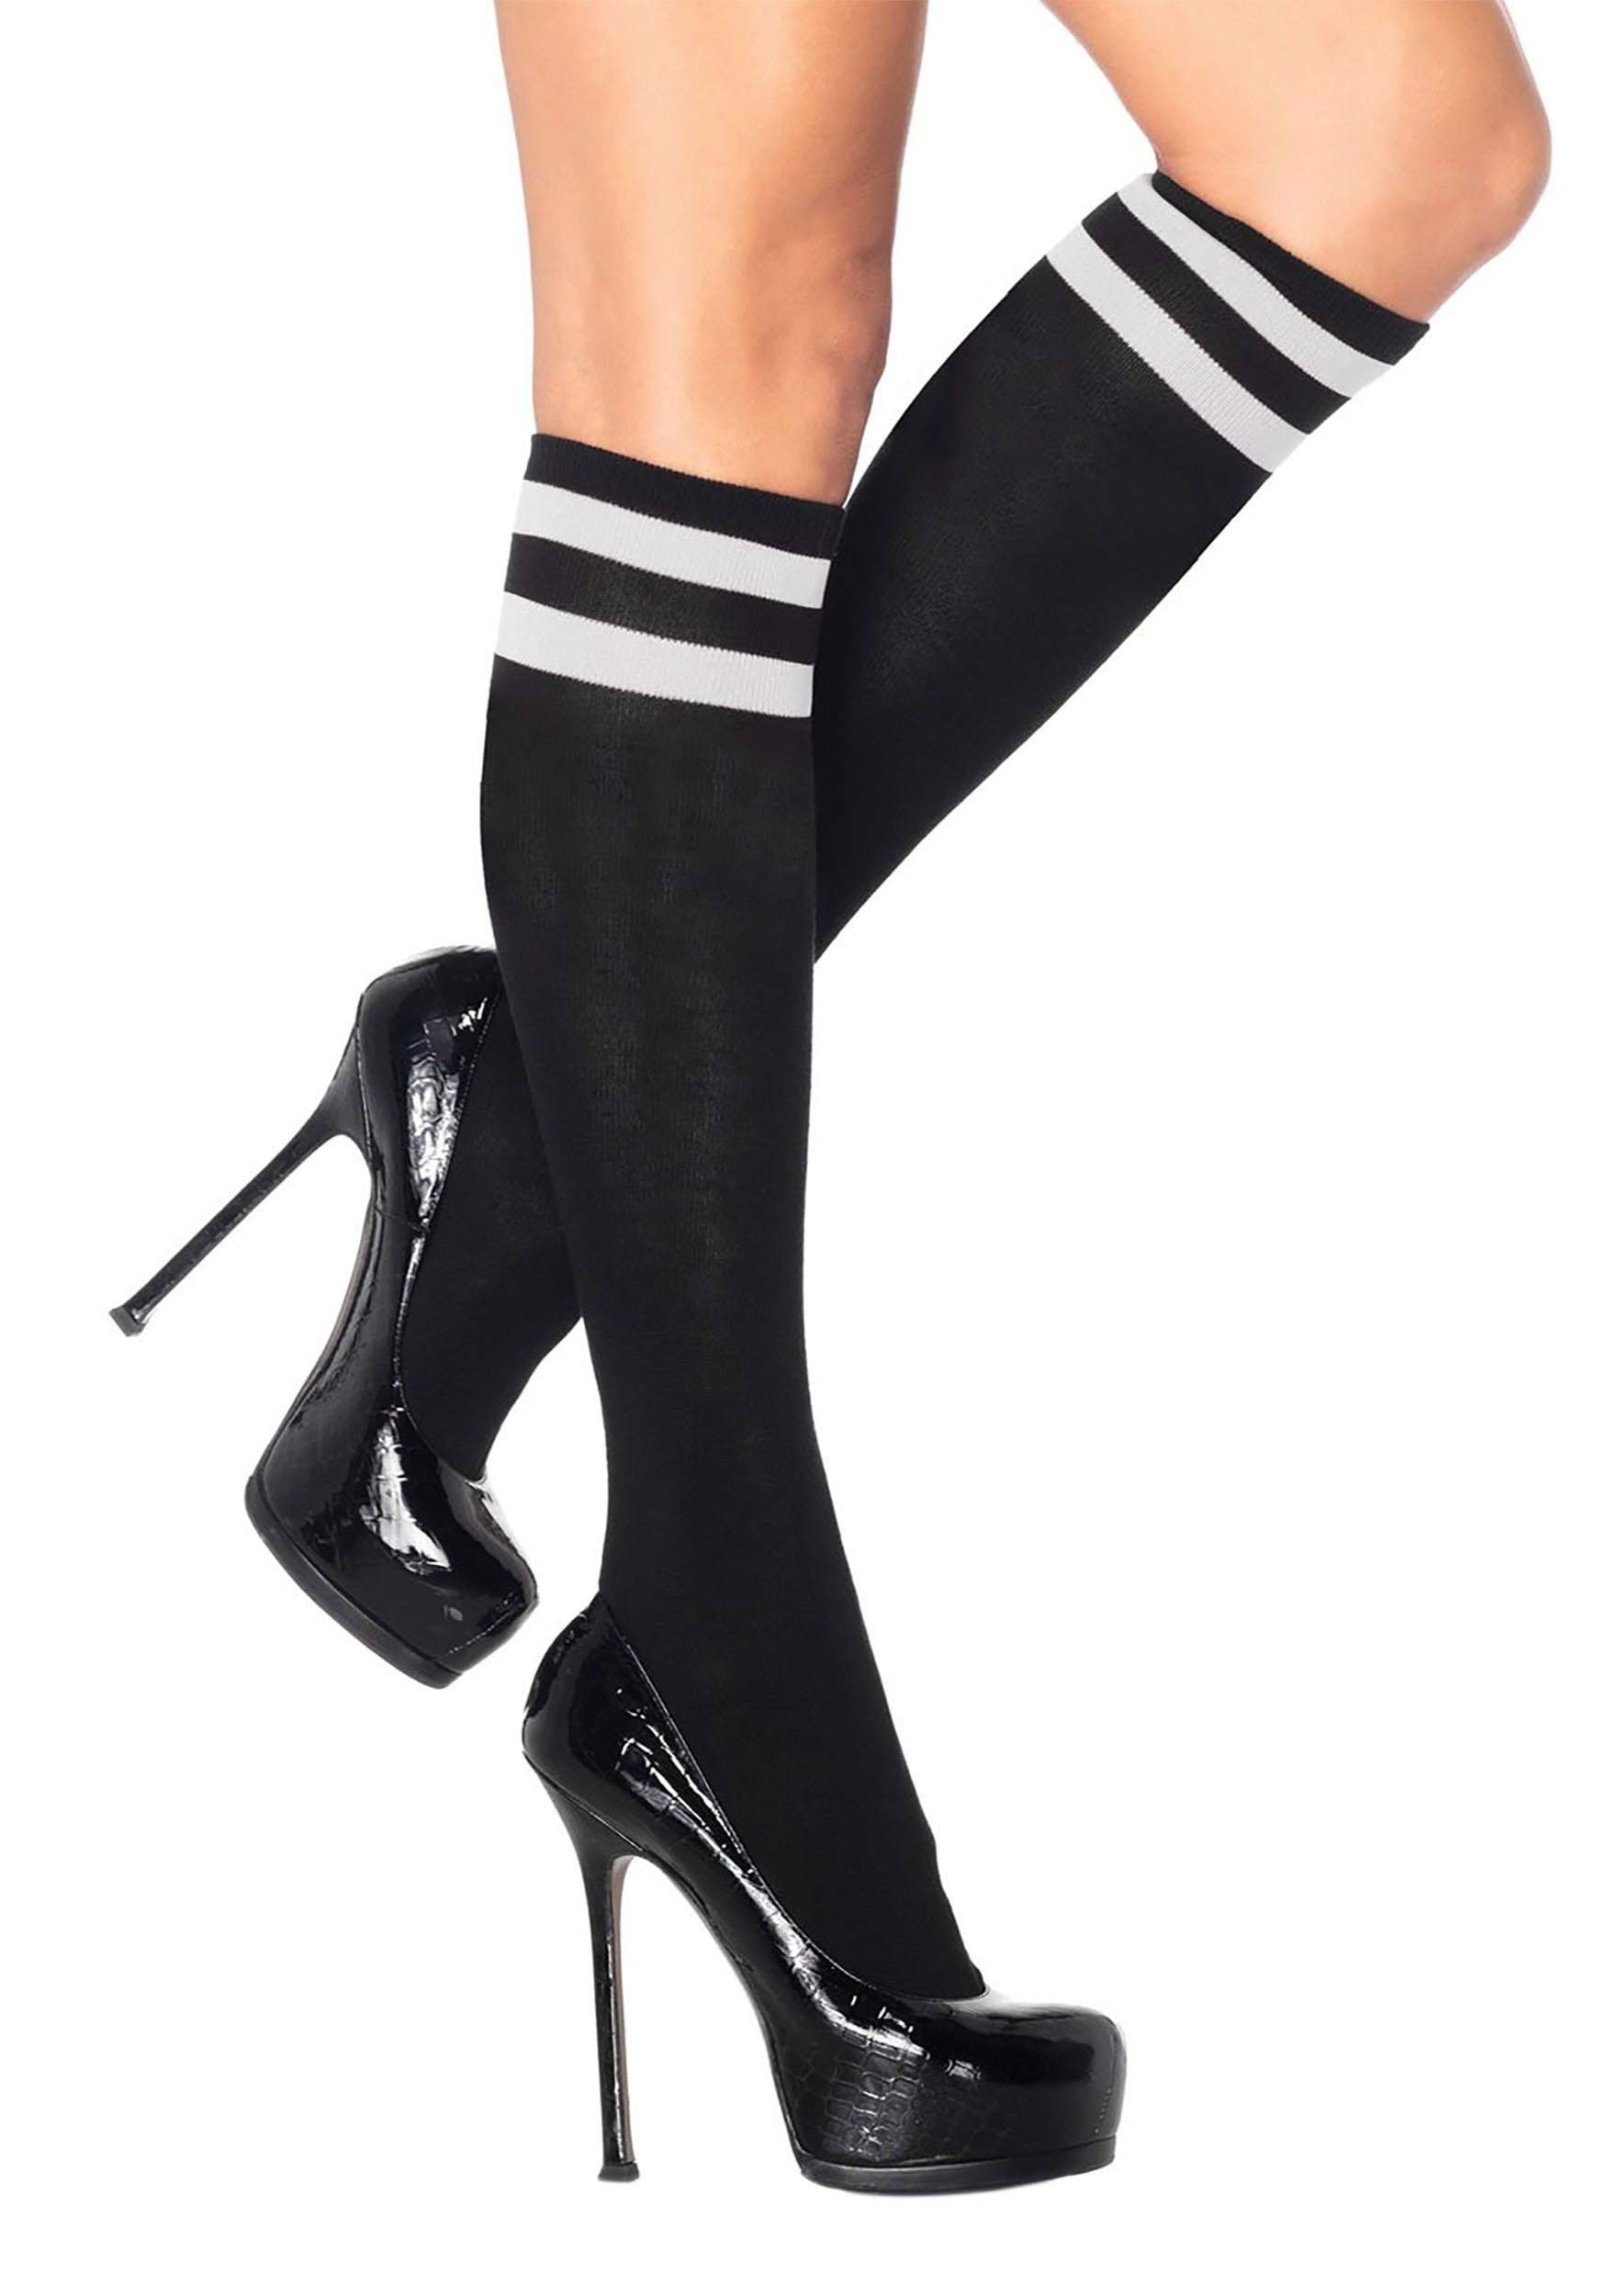 Black with White Striped Athletic Socks Women